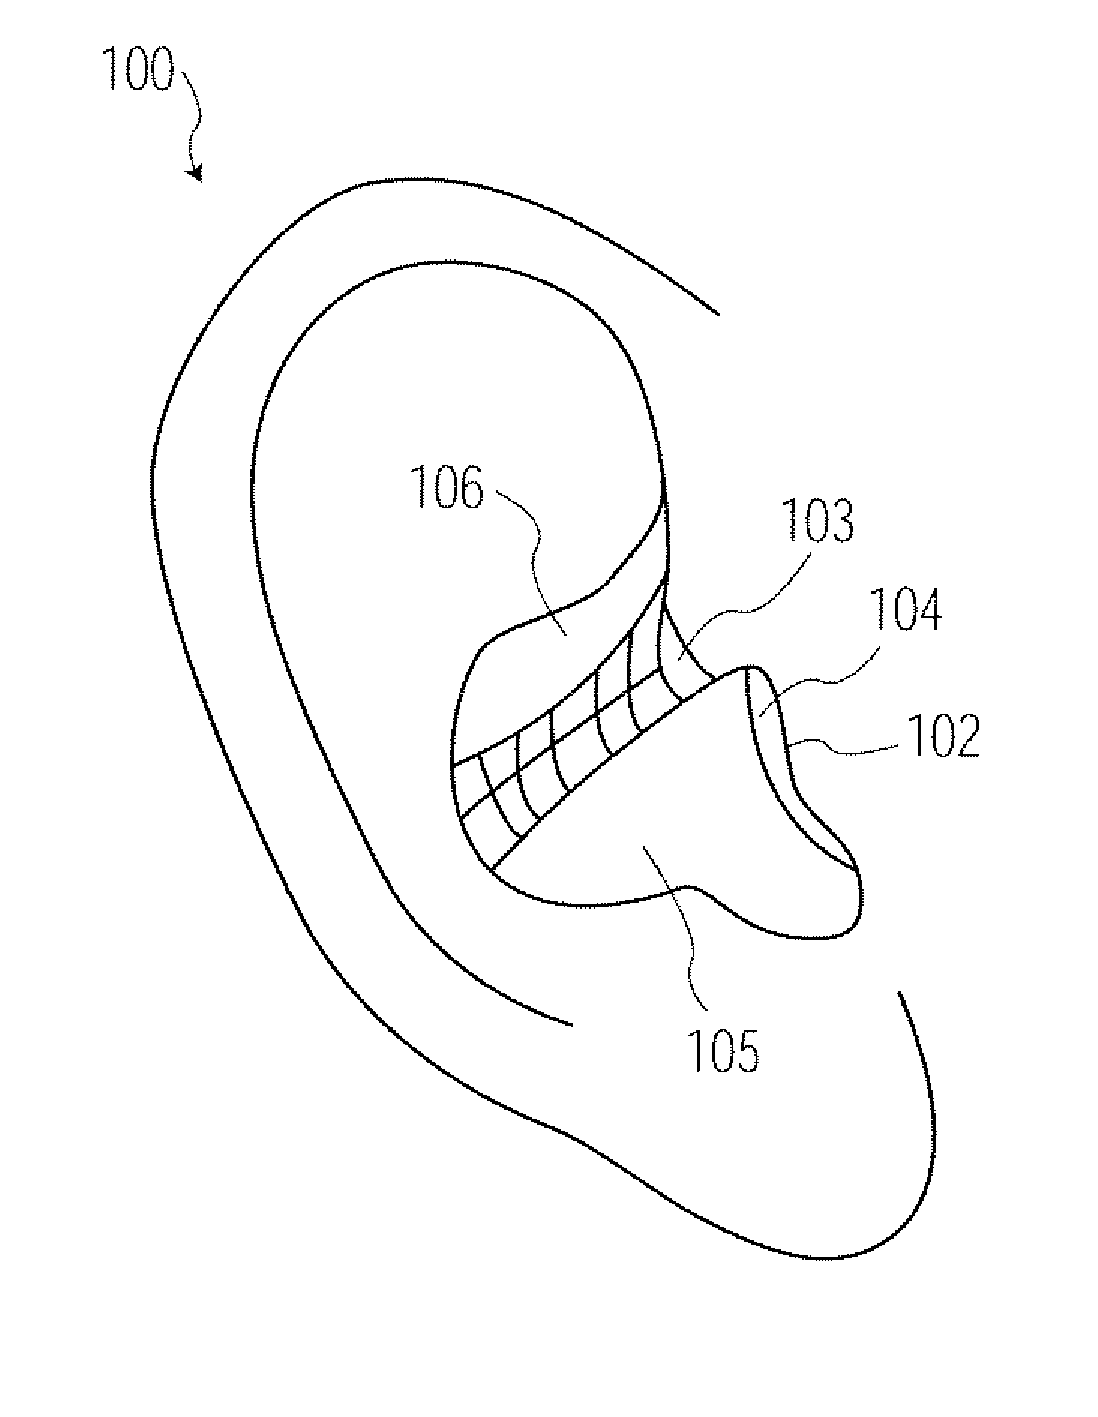 Method and Apparatus for Aperture Detection of 3D Hearing Aid Shells